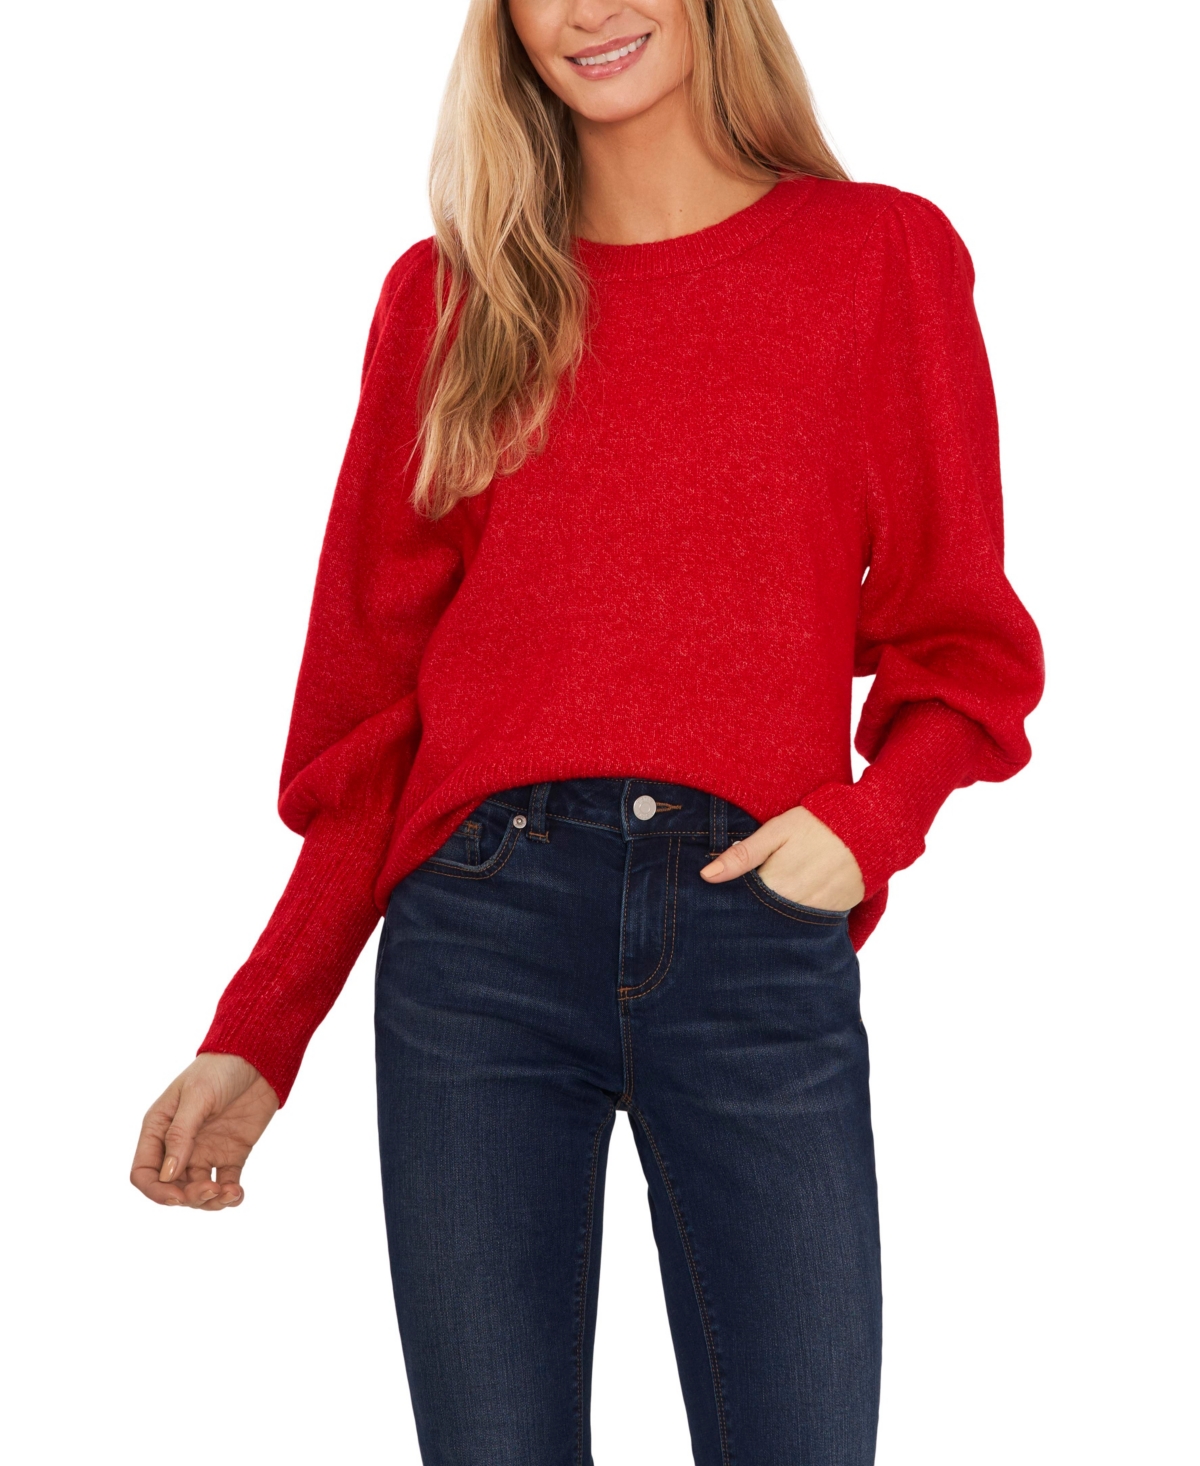 1930s Style Sweaters | Vintage Sweaters CeCe Womens Puff Long Sleeve Crew Neck Sweater - Luminous Red $34.50 AT vintagedancer.com